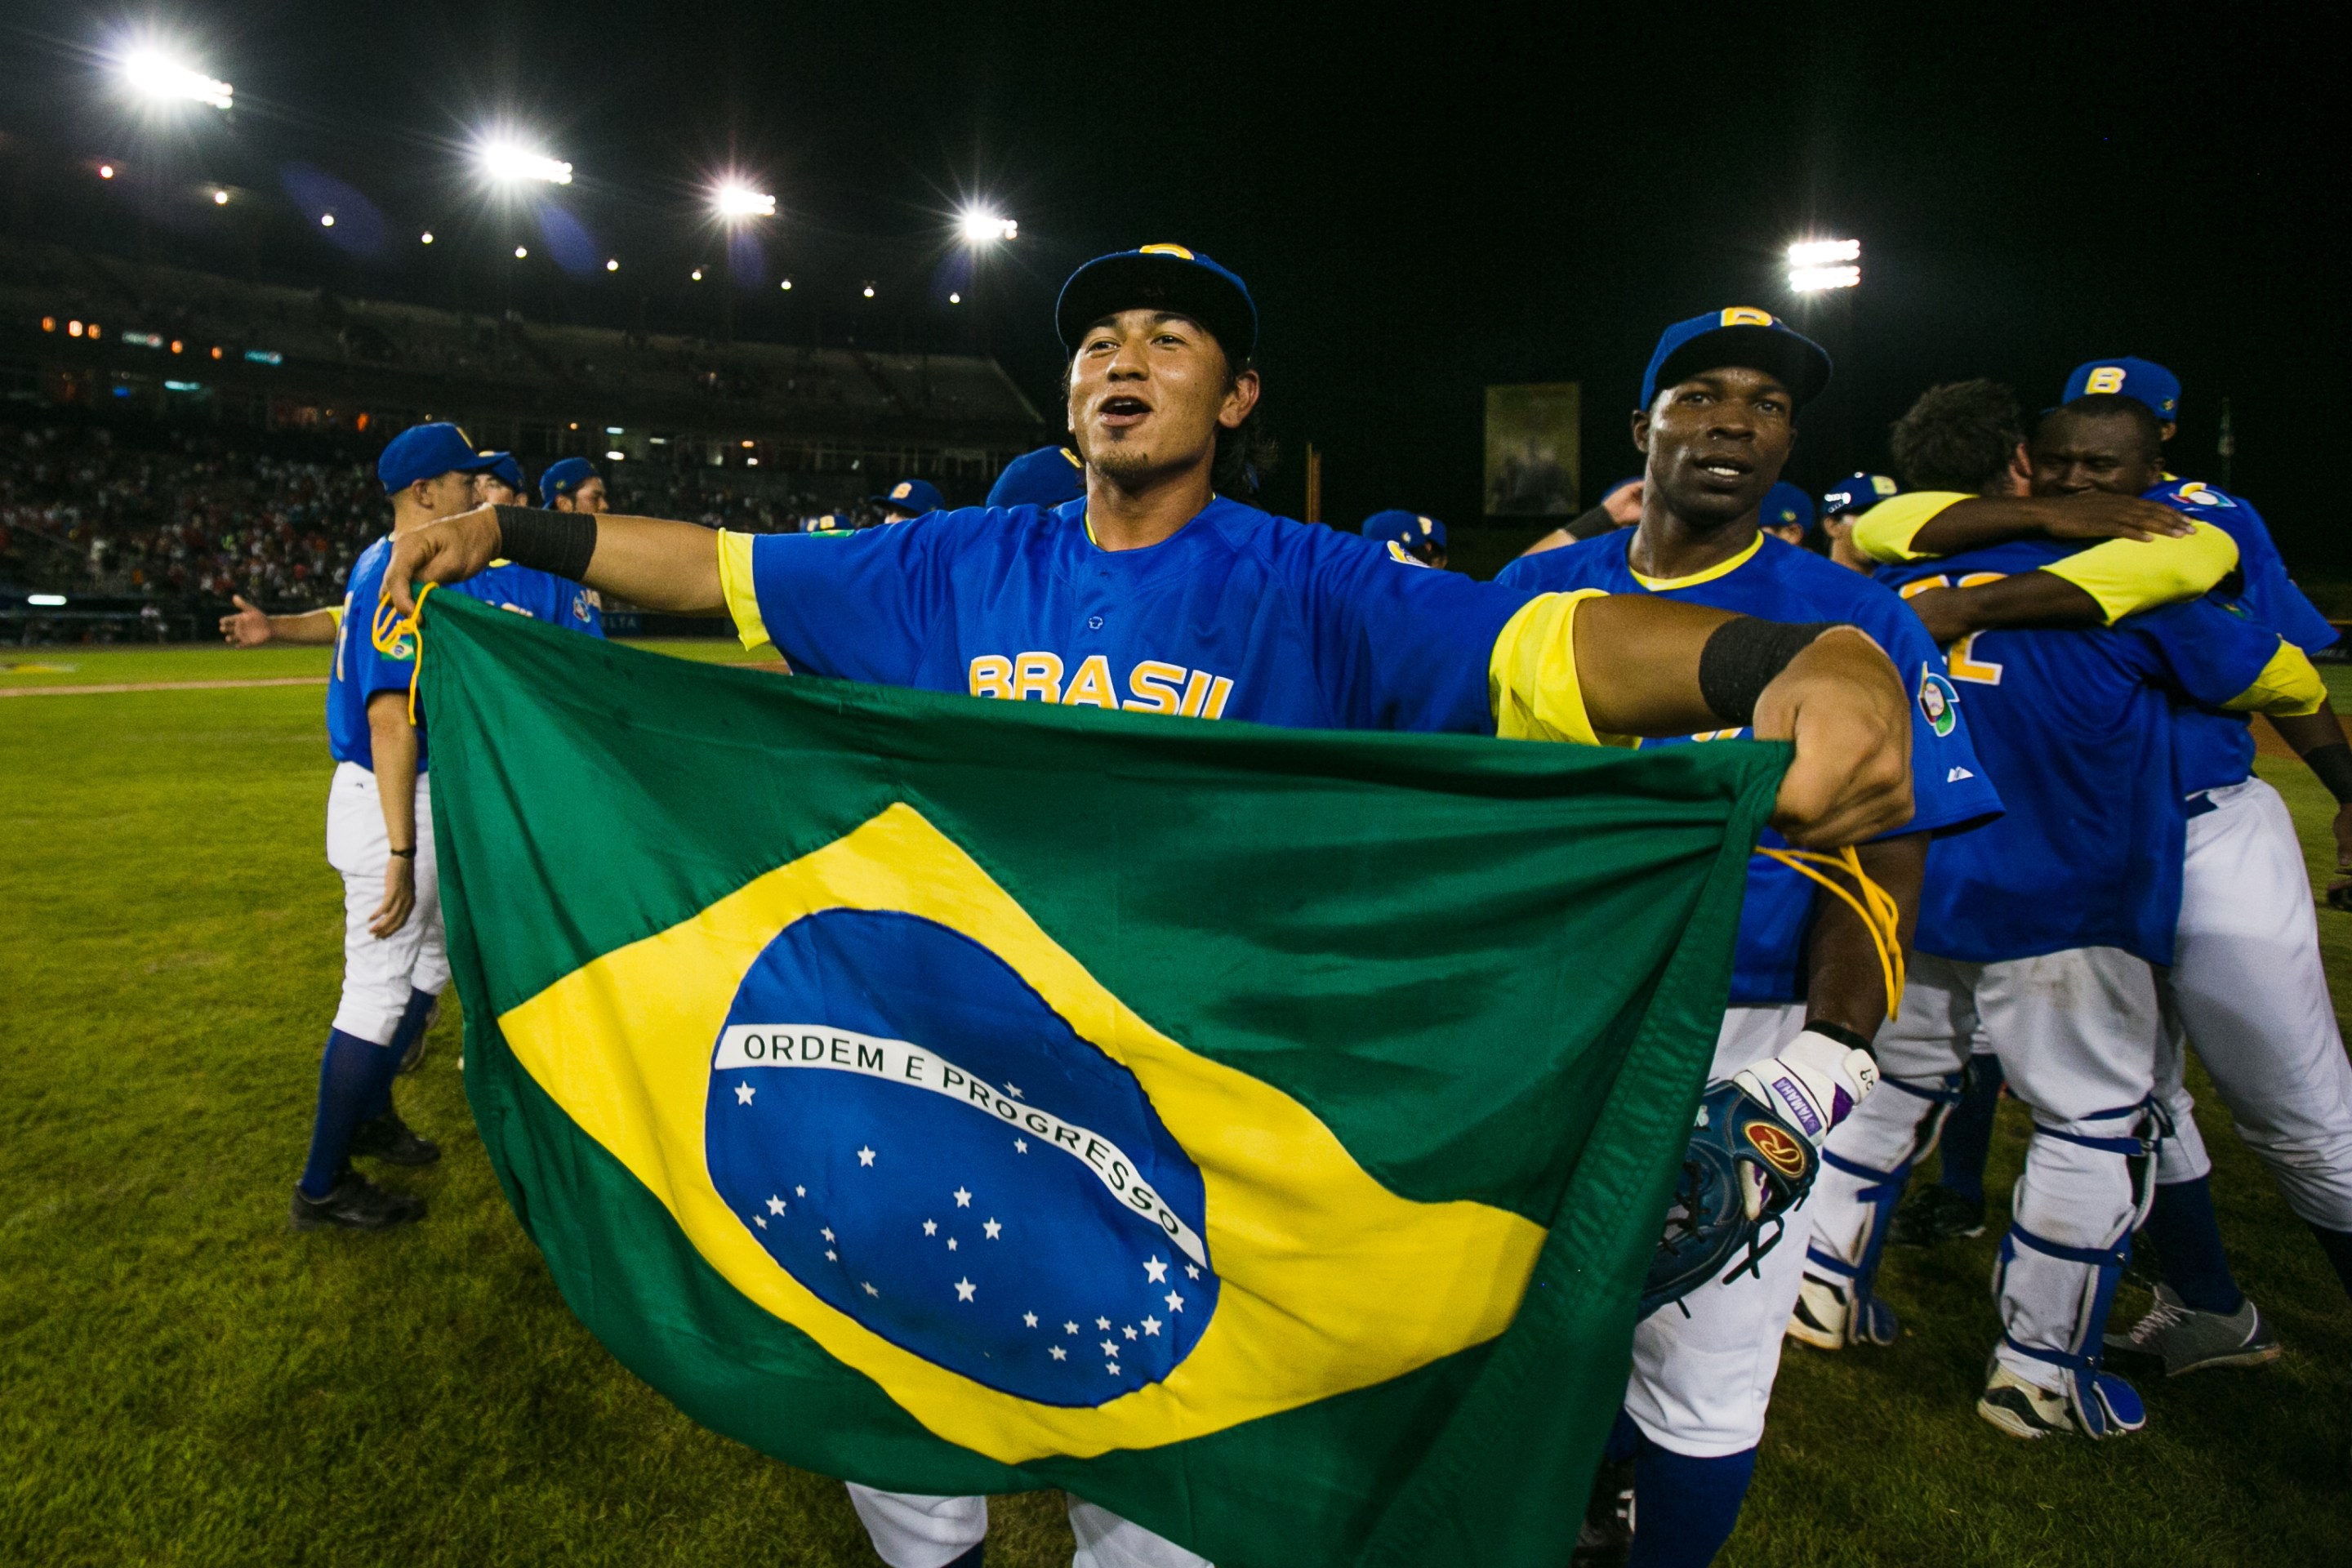 Pedro Okuda of Team Brazil celebrates a win over Panama in the WBC qualifiers in 2012.